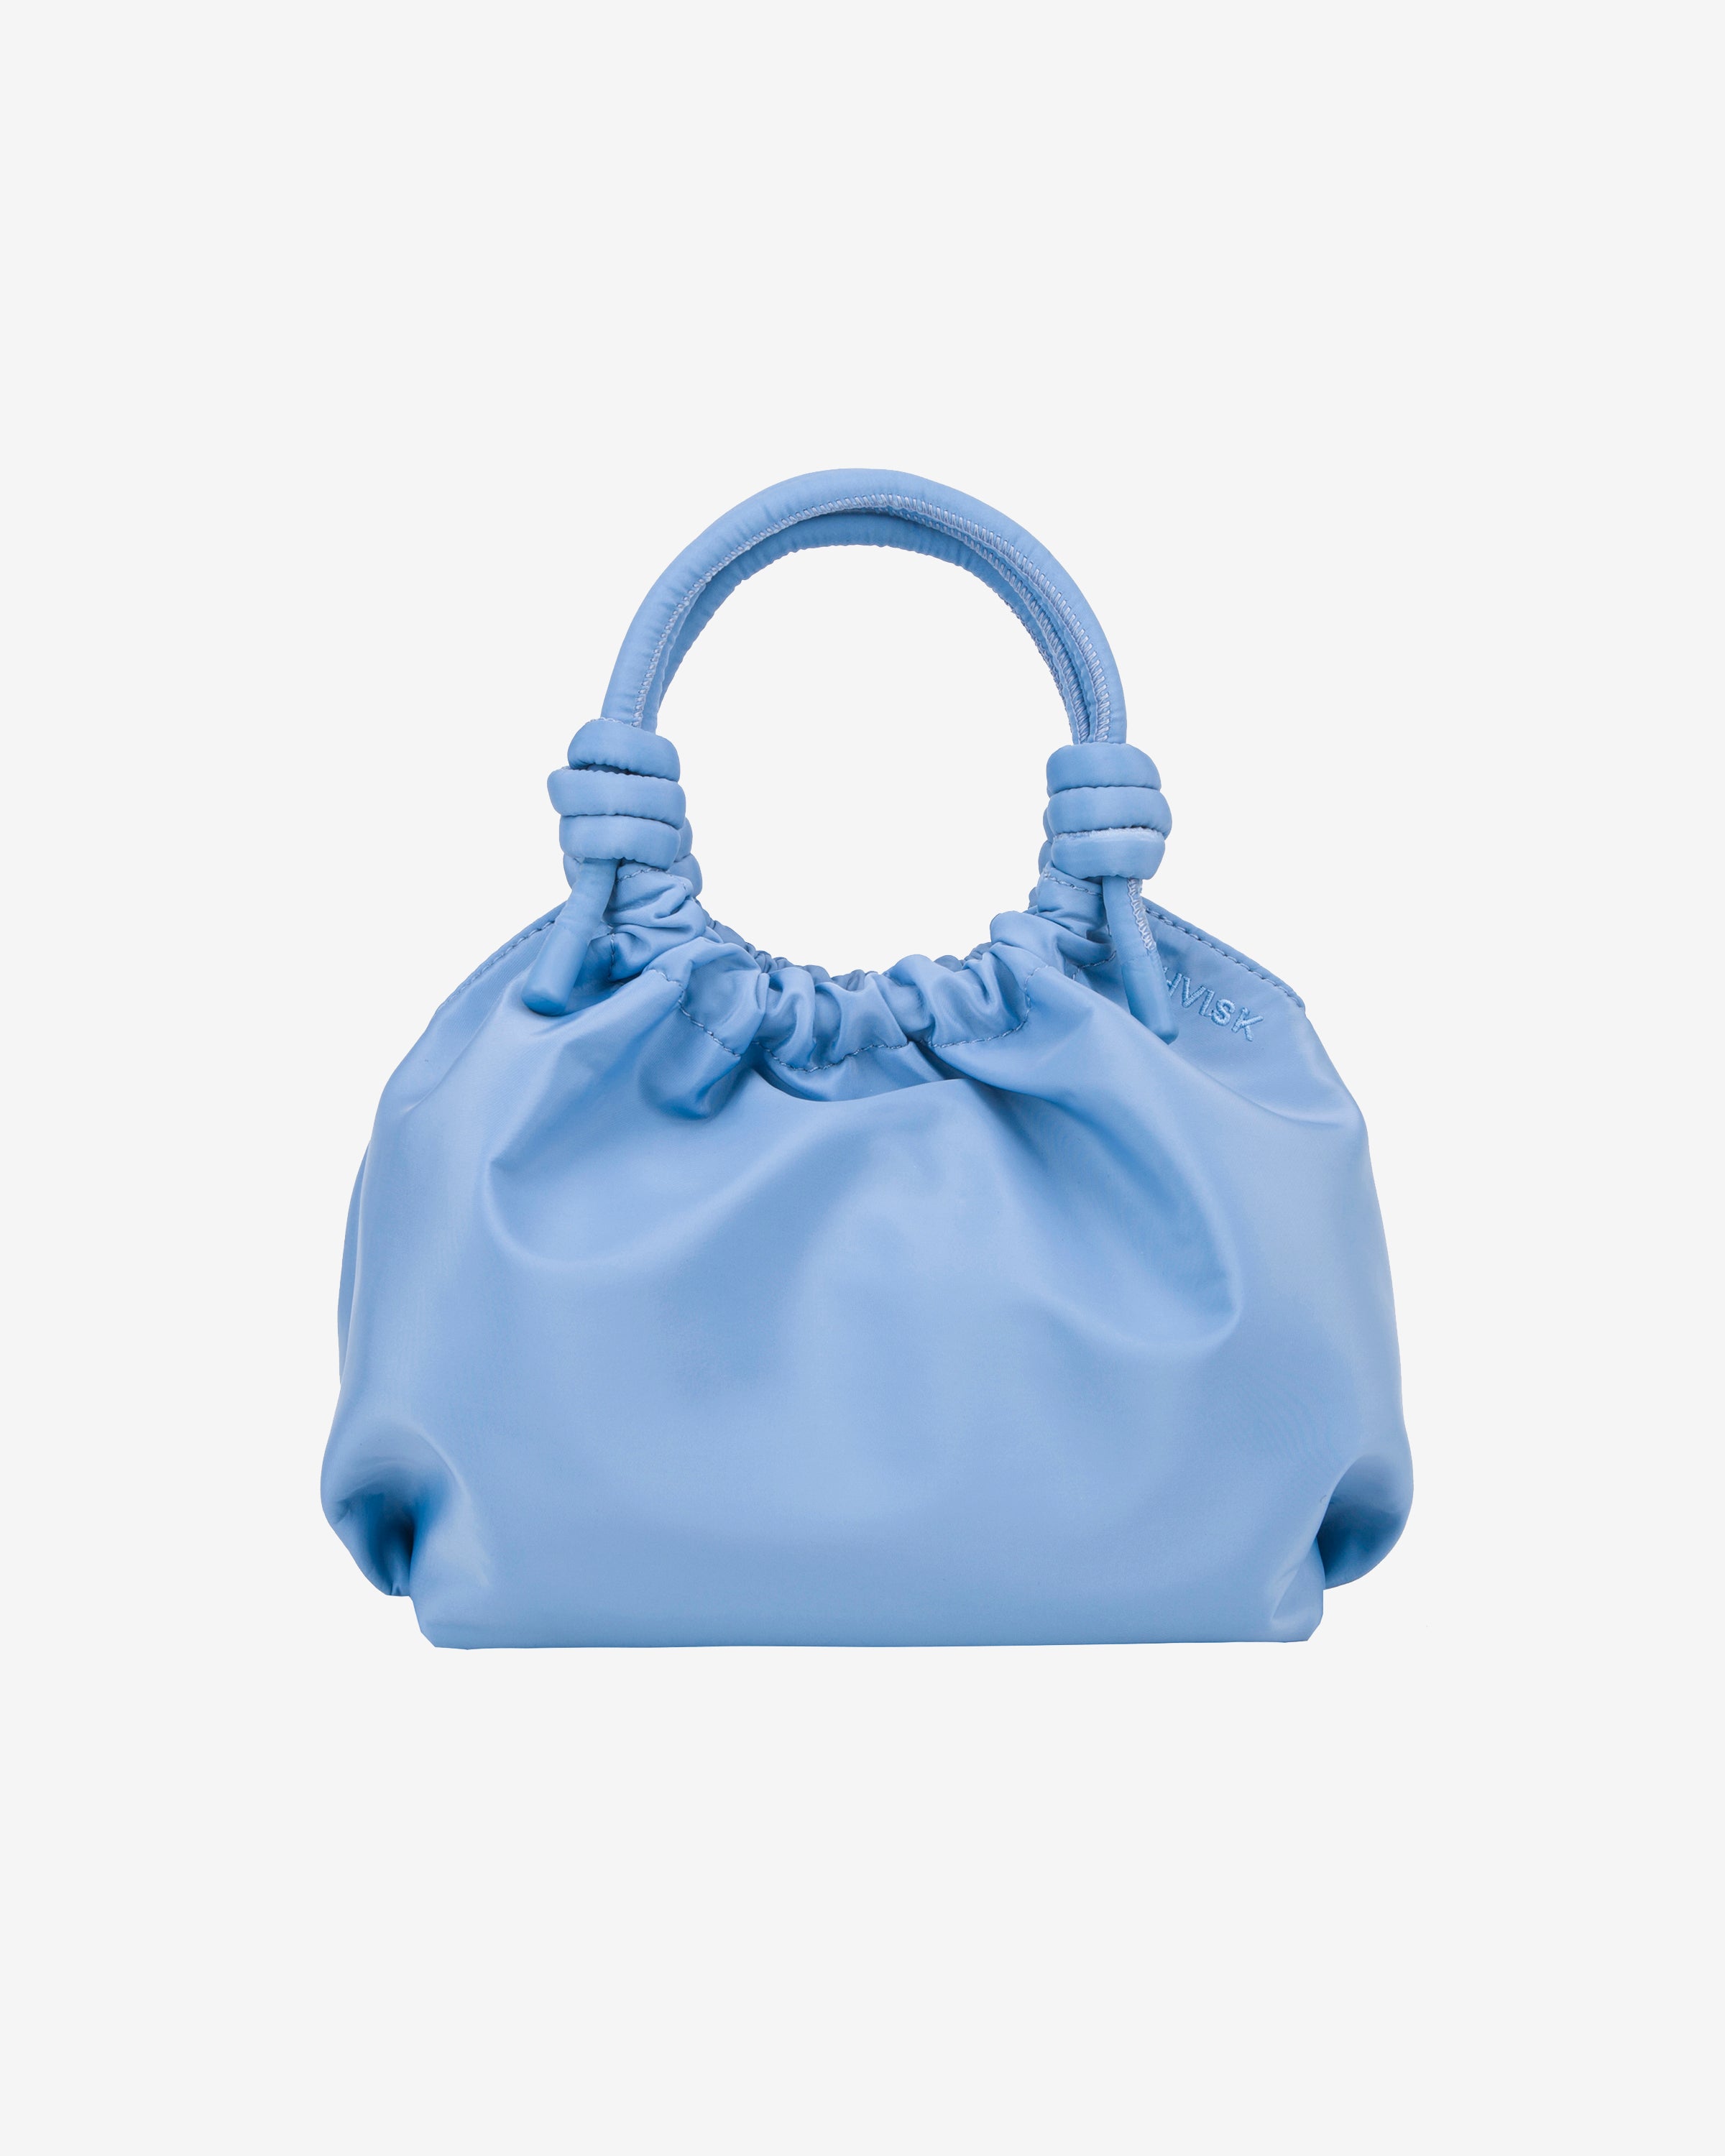 BAGS - Everyday classic to eye-catching statement bags